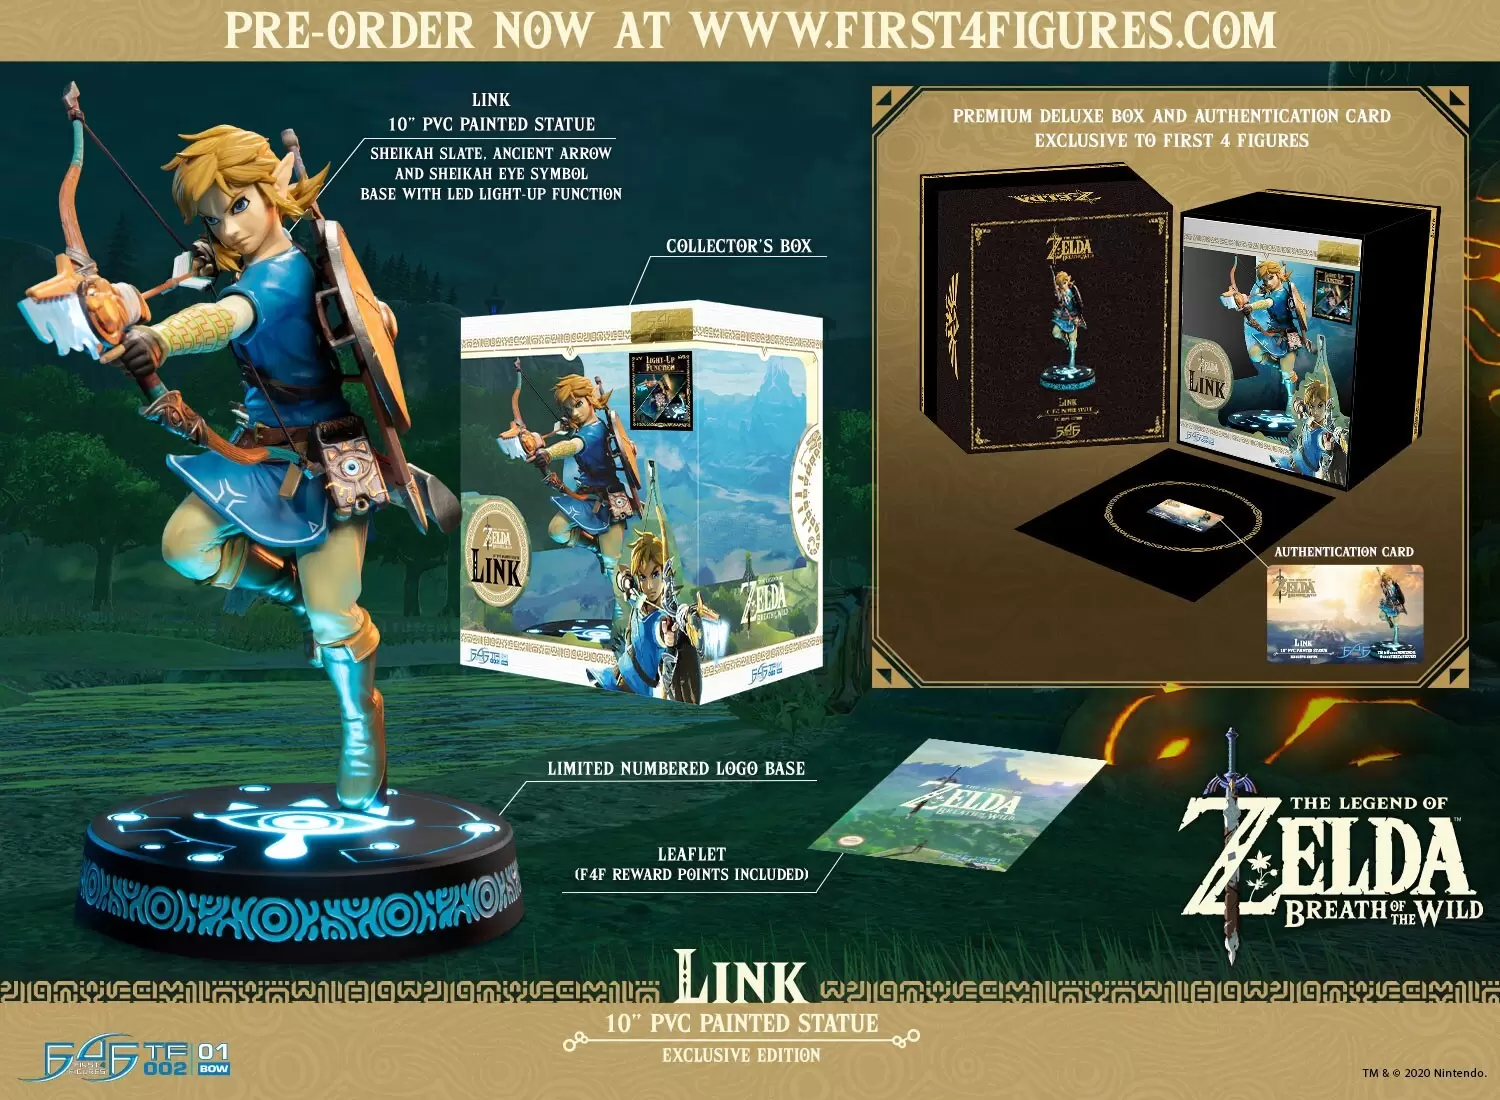 First 4 Figures (F4F) - The Legend of Zelda: Breath of the Wild - Link - Exclusive Edition